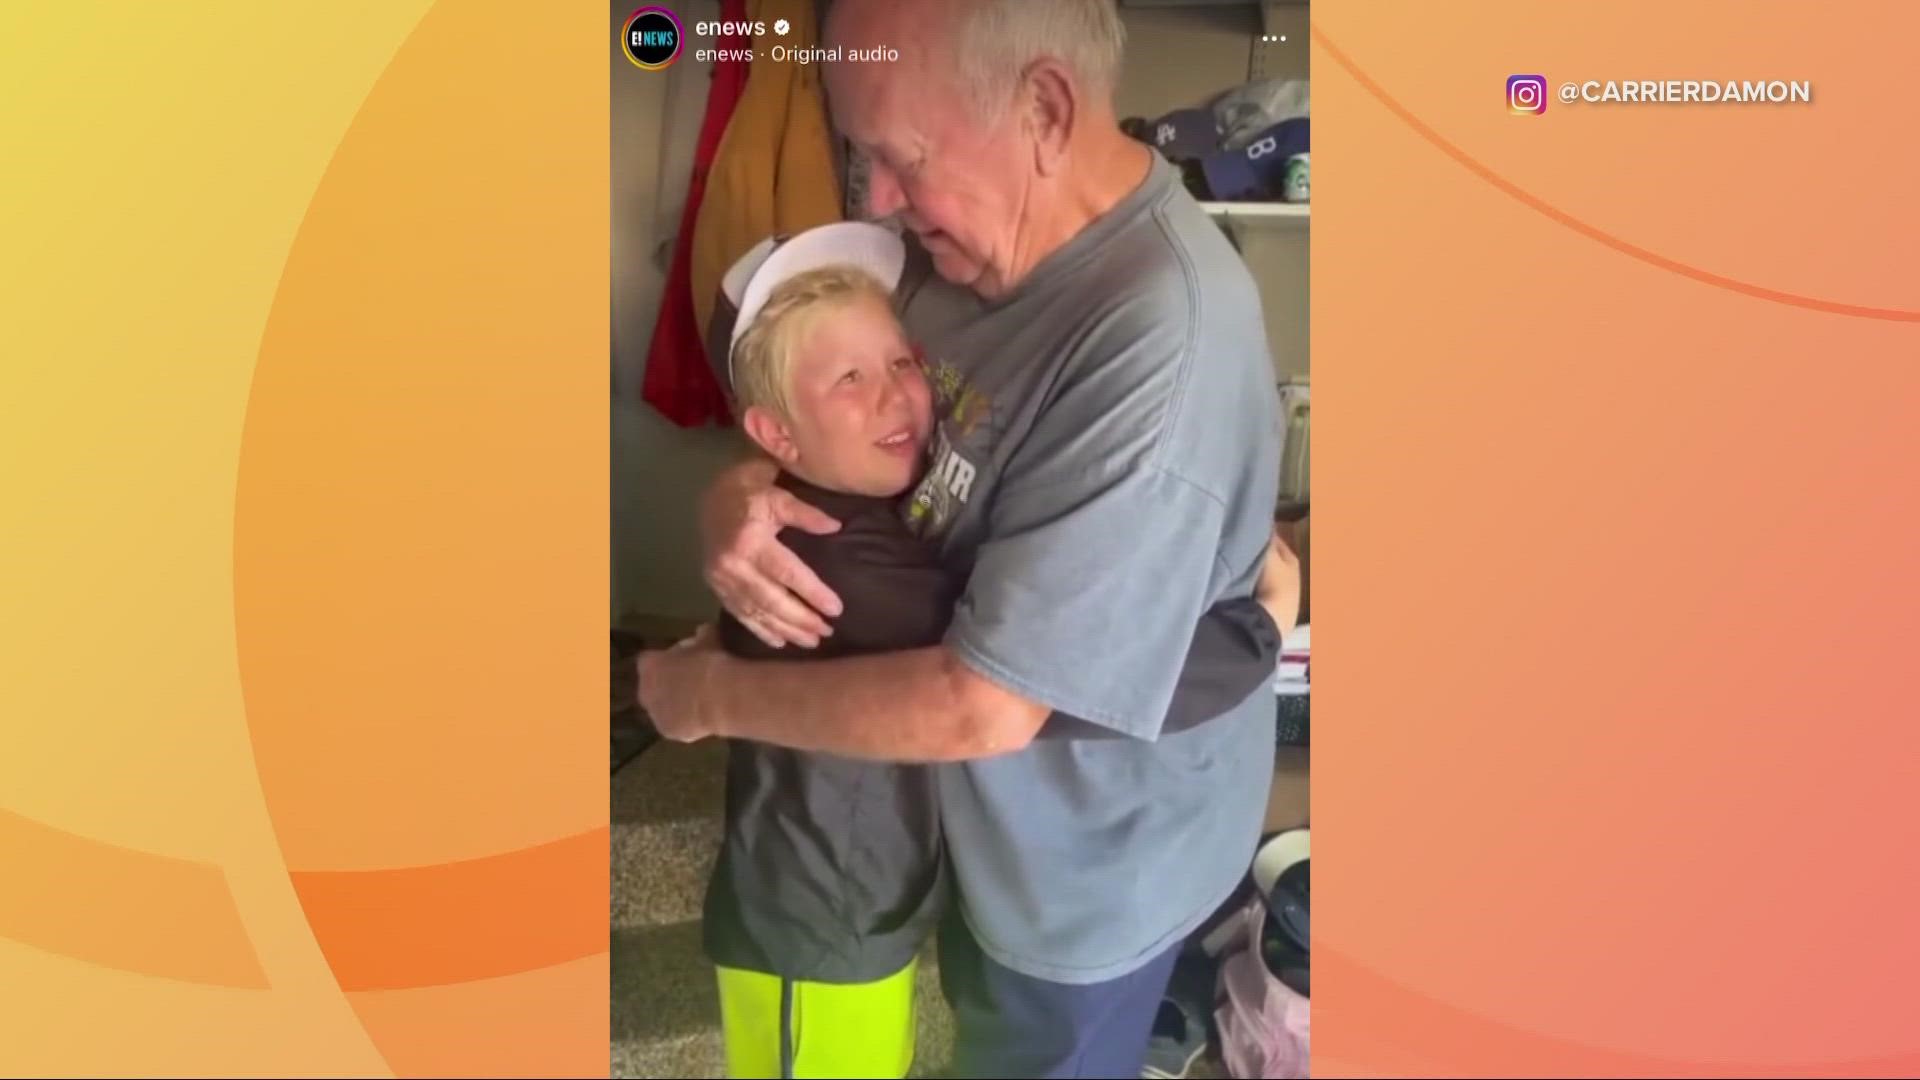 A special story of a bond between a grandfather and his grandson brought together by baseball.